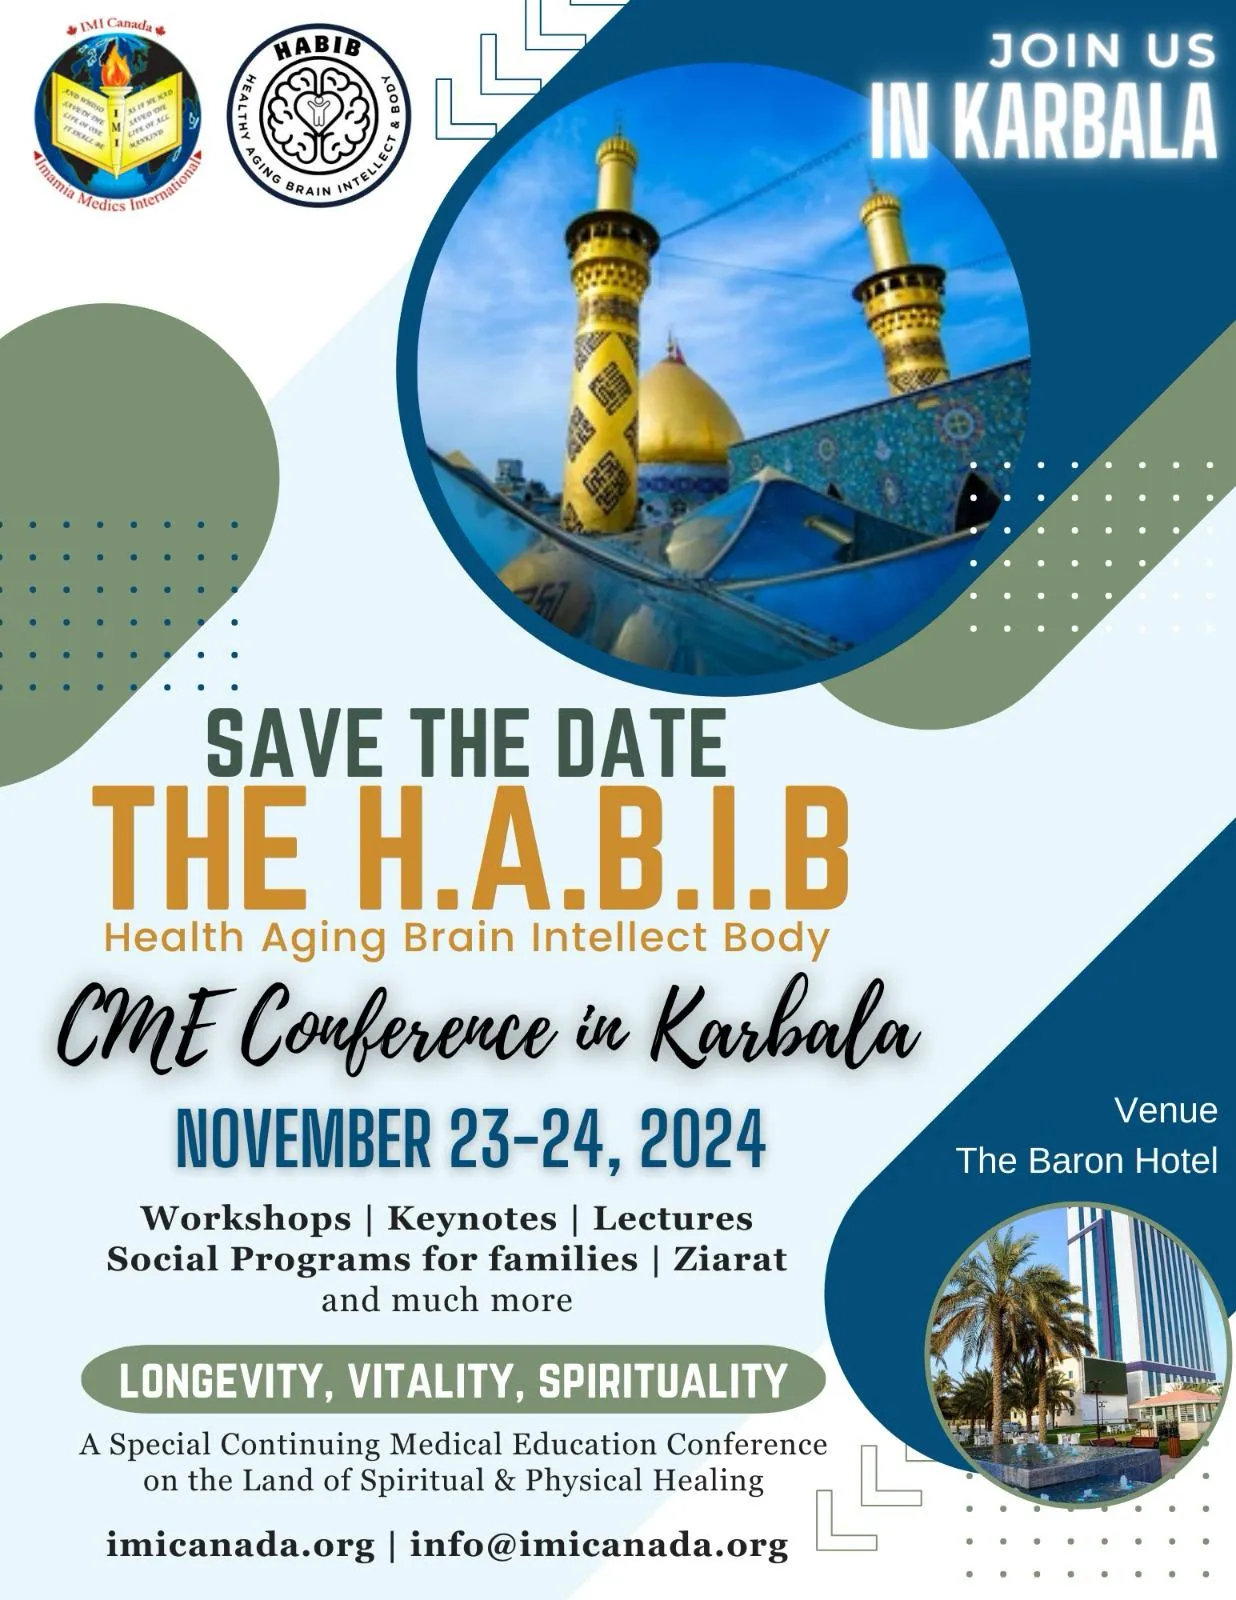 The H.A.B.I.B CME Conference in Karbala